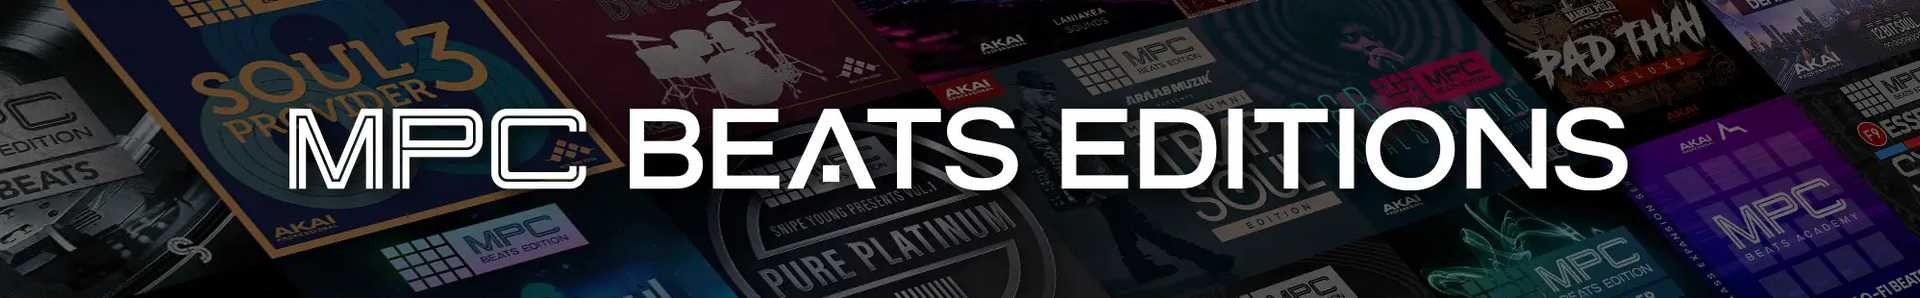 MPC Beats Editions Banner - Array of packs in dark background with white text in foreground